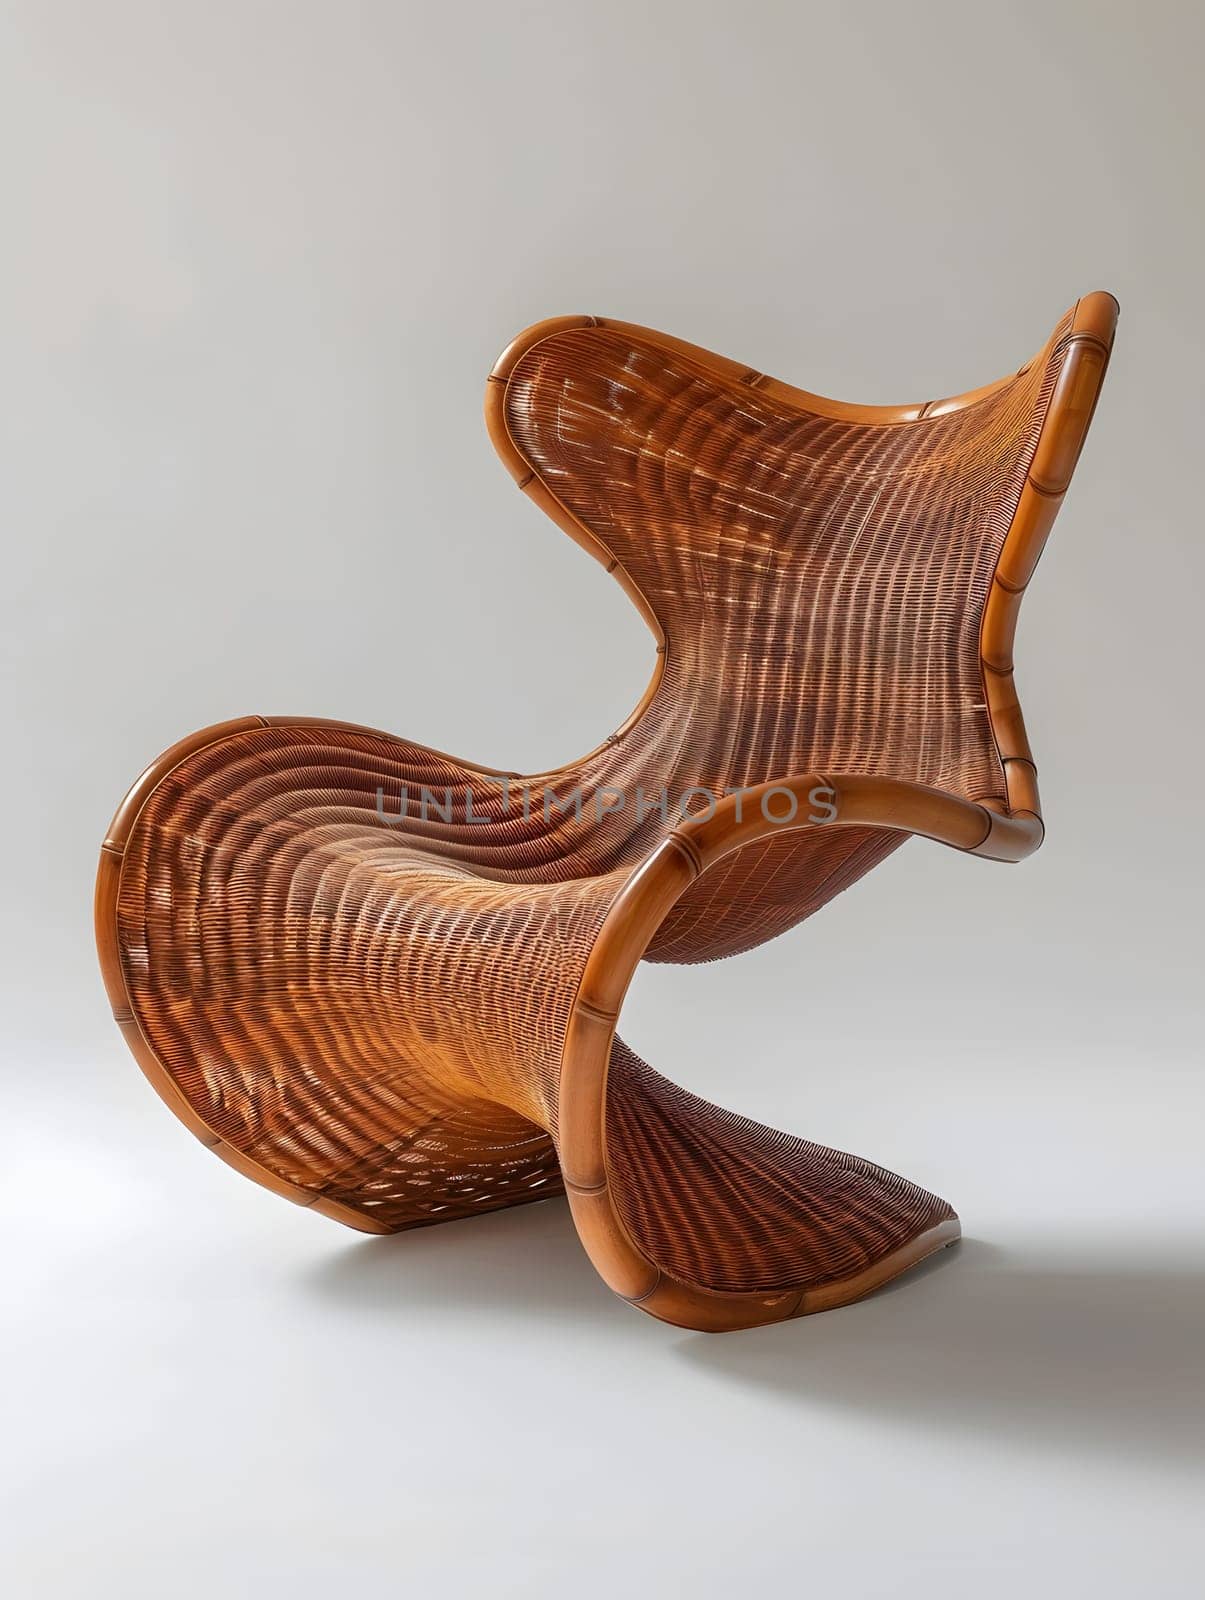 A beautifully crafted wooden chair with intricate carvings of fish and molluscs sits elegantly on a sleek white surface, showcasing the artistry of wood and metal